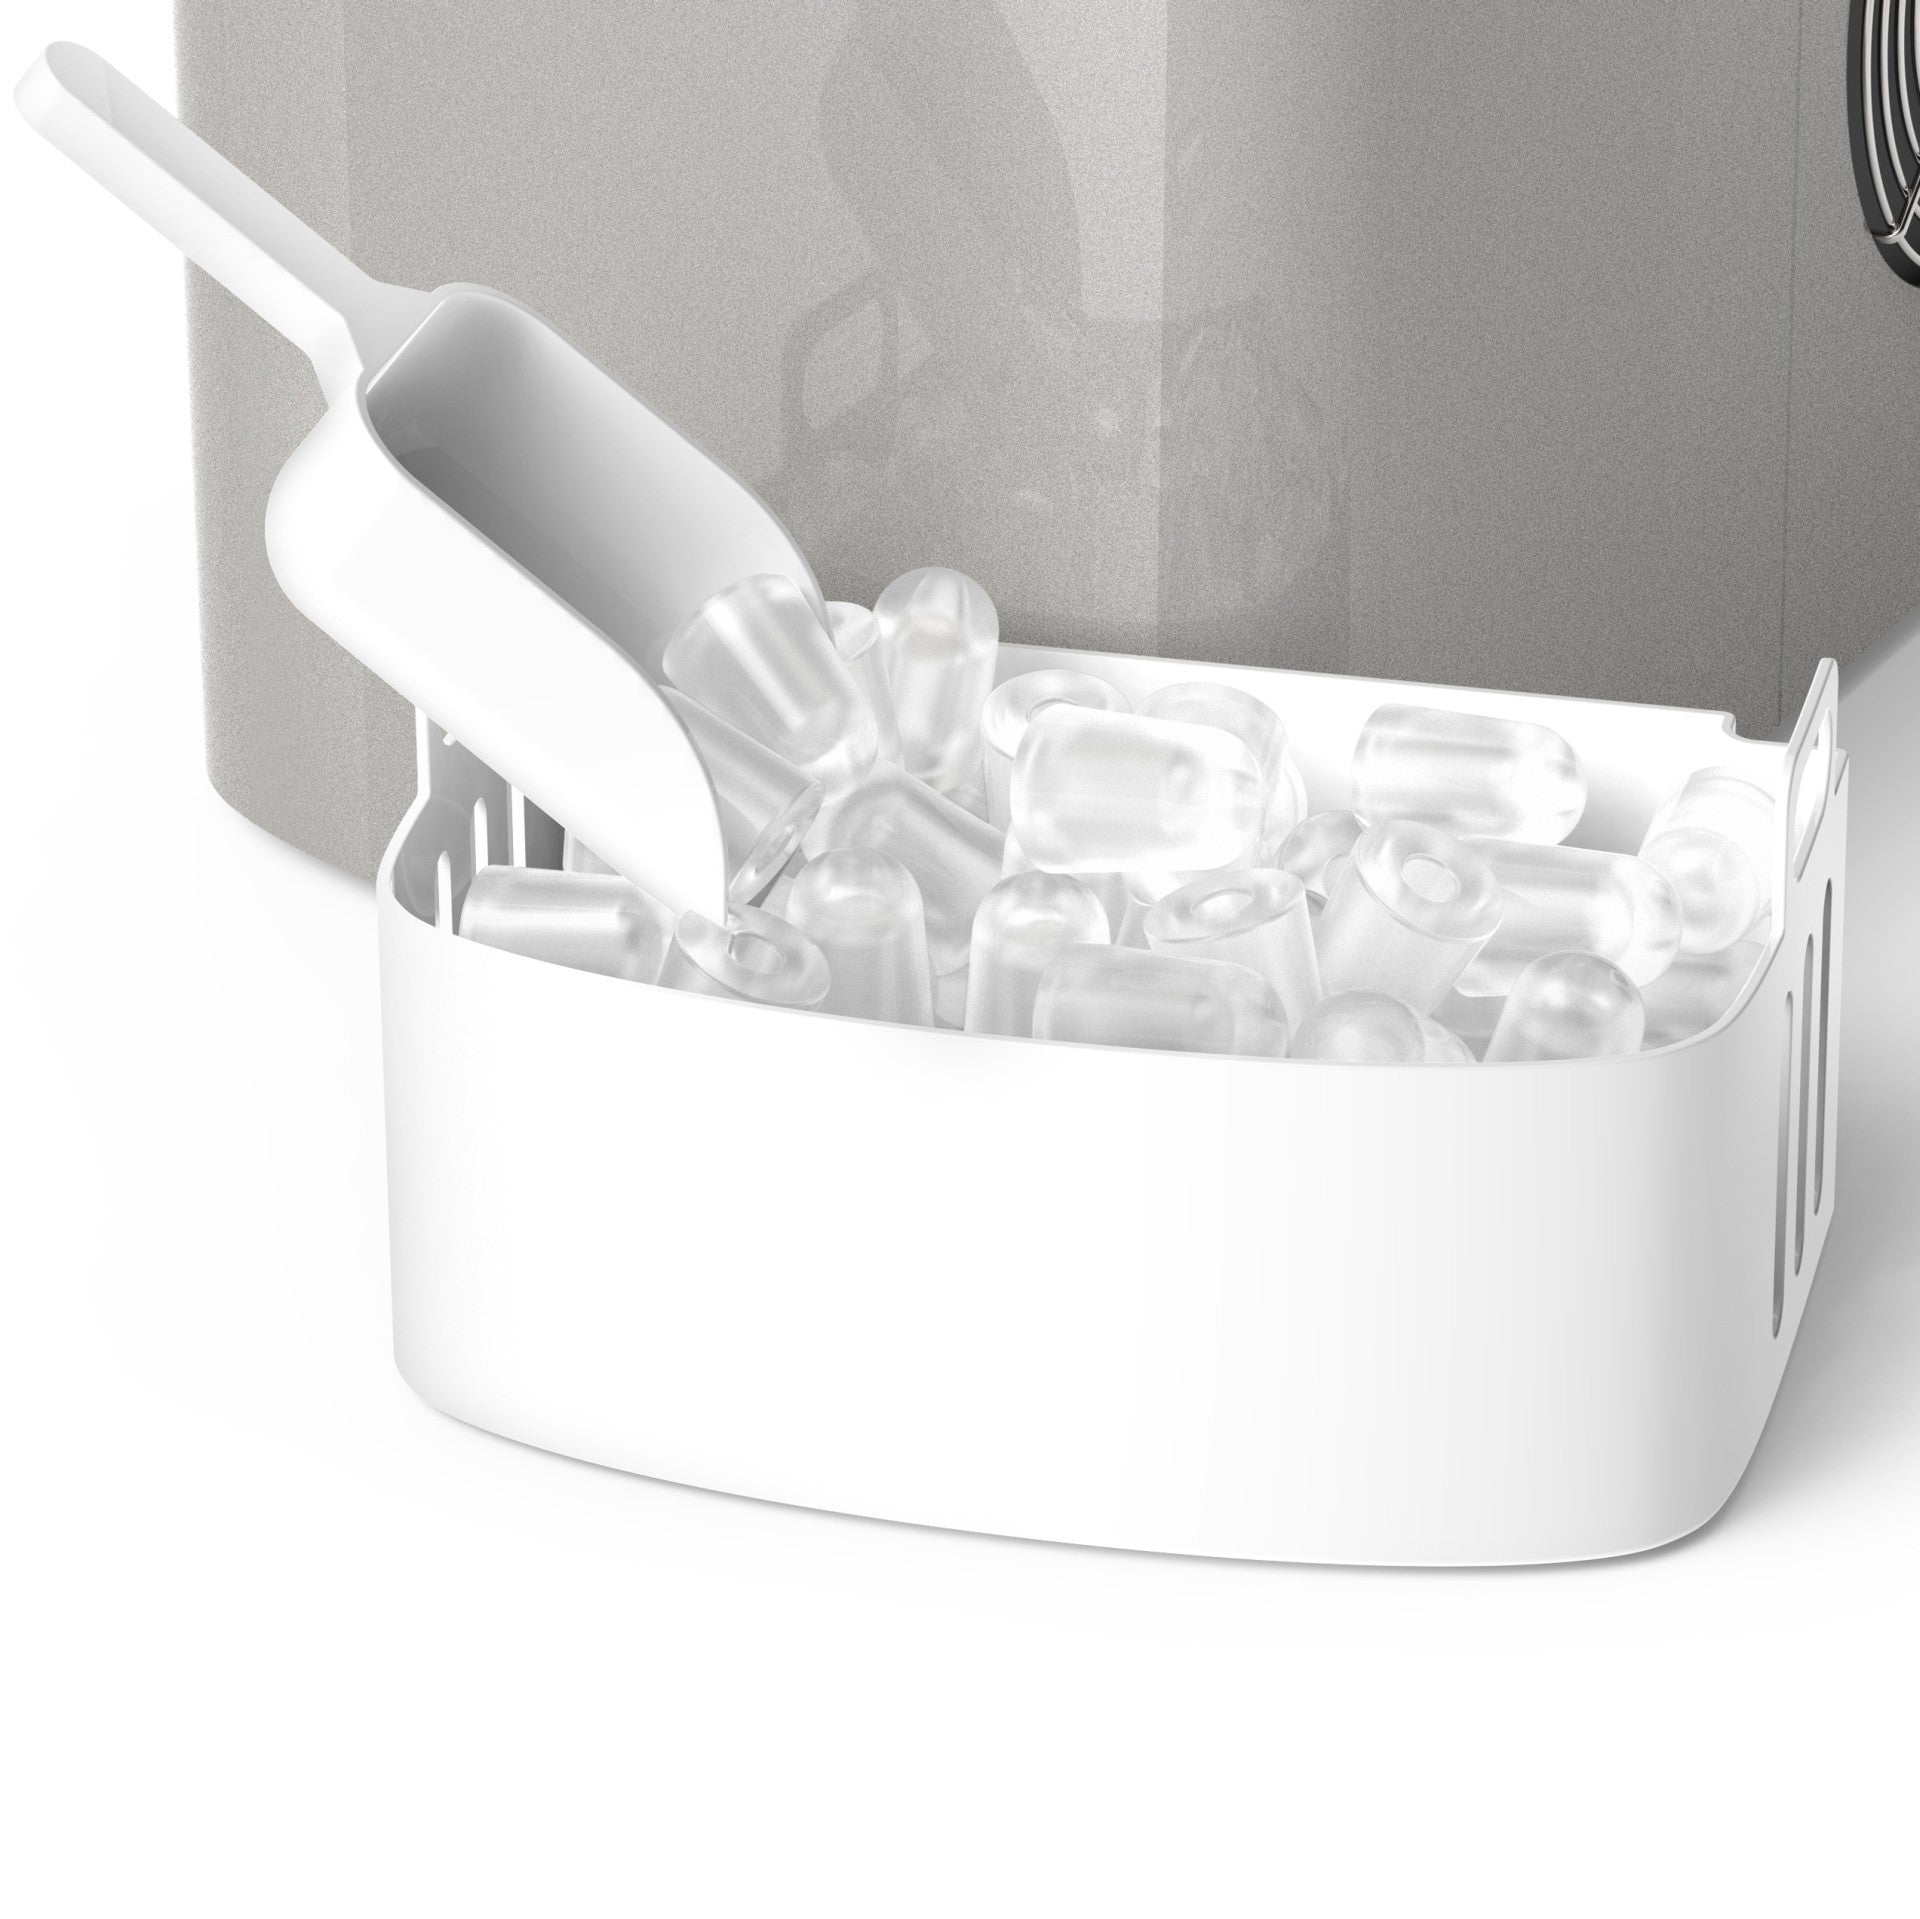 accessories of ice maker